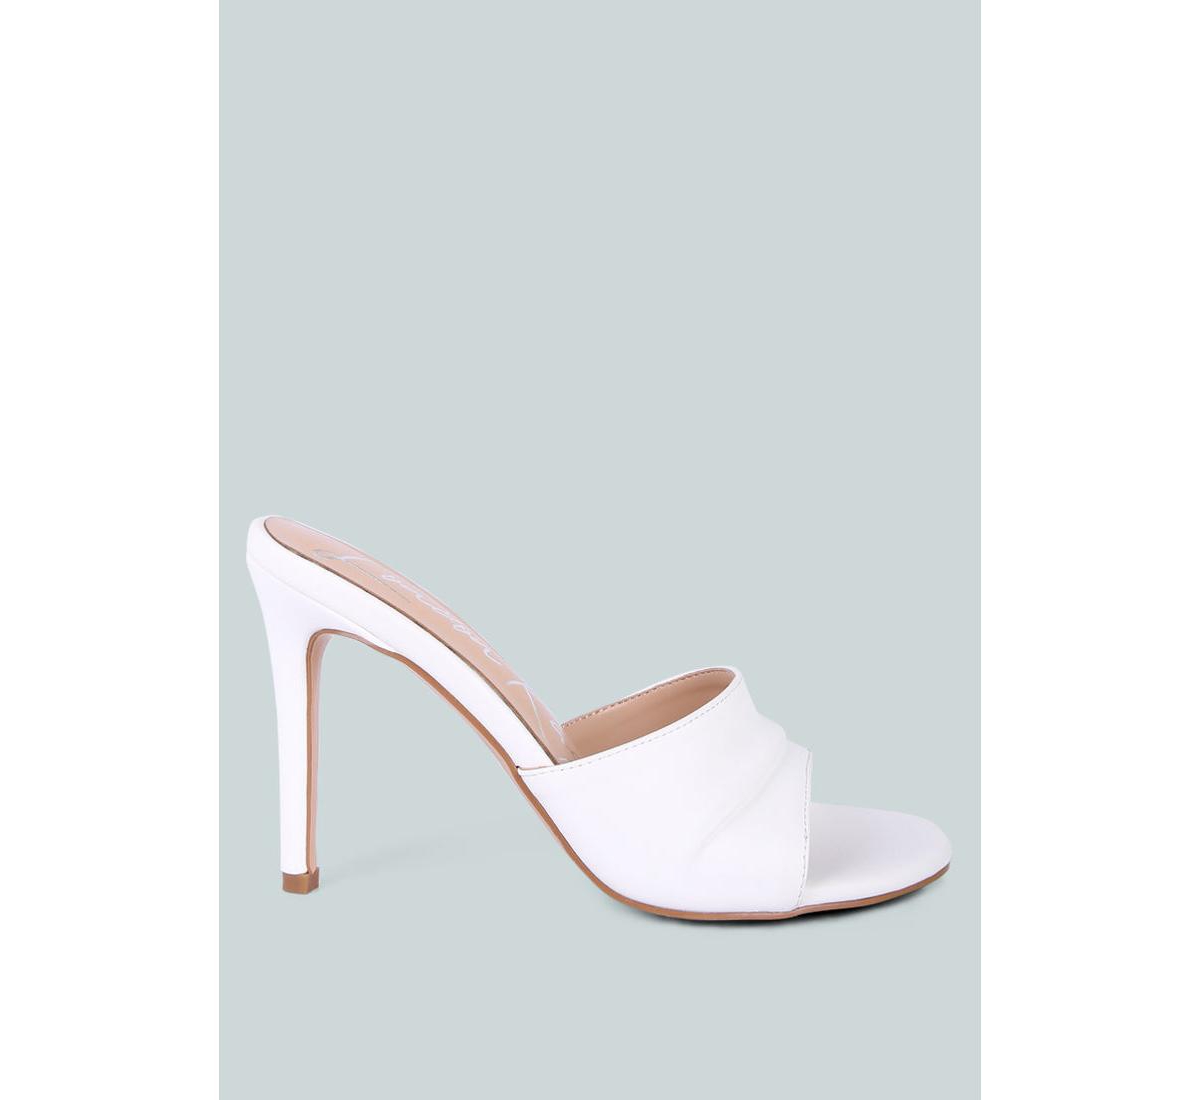 3rd divorce wide strap casual high heels - White